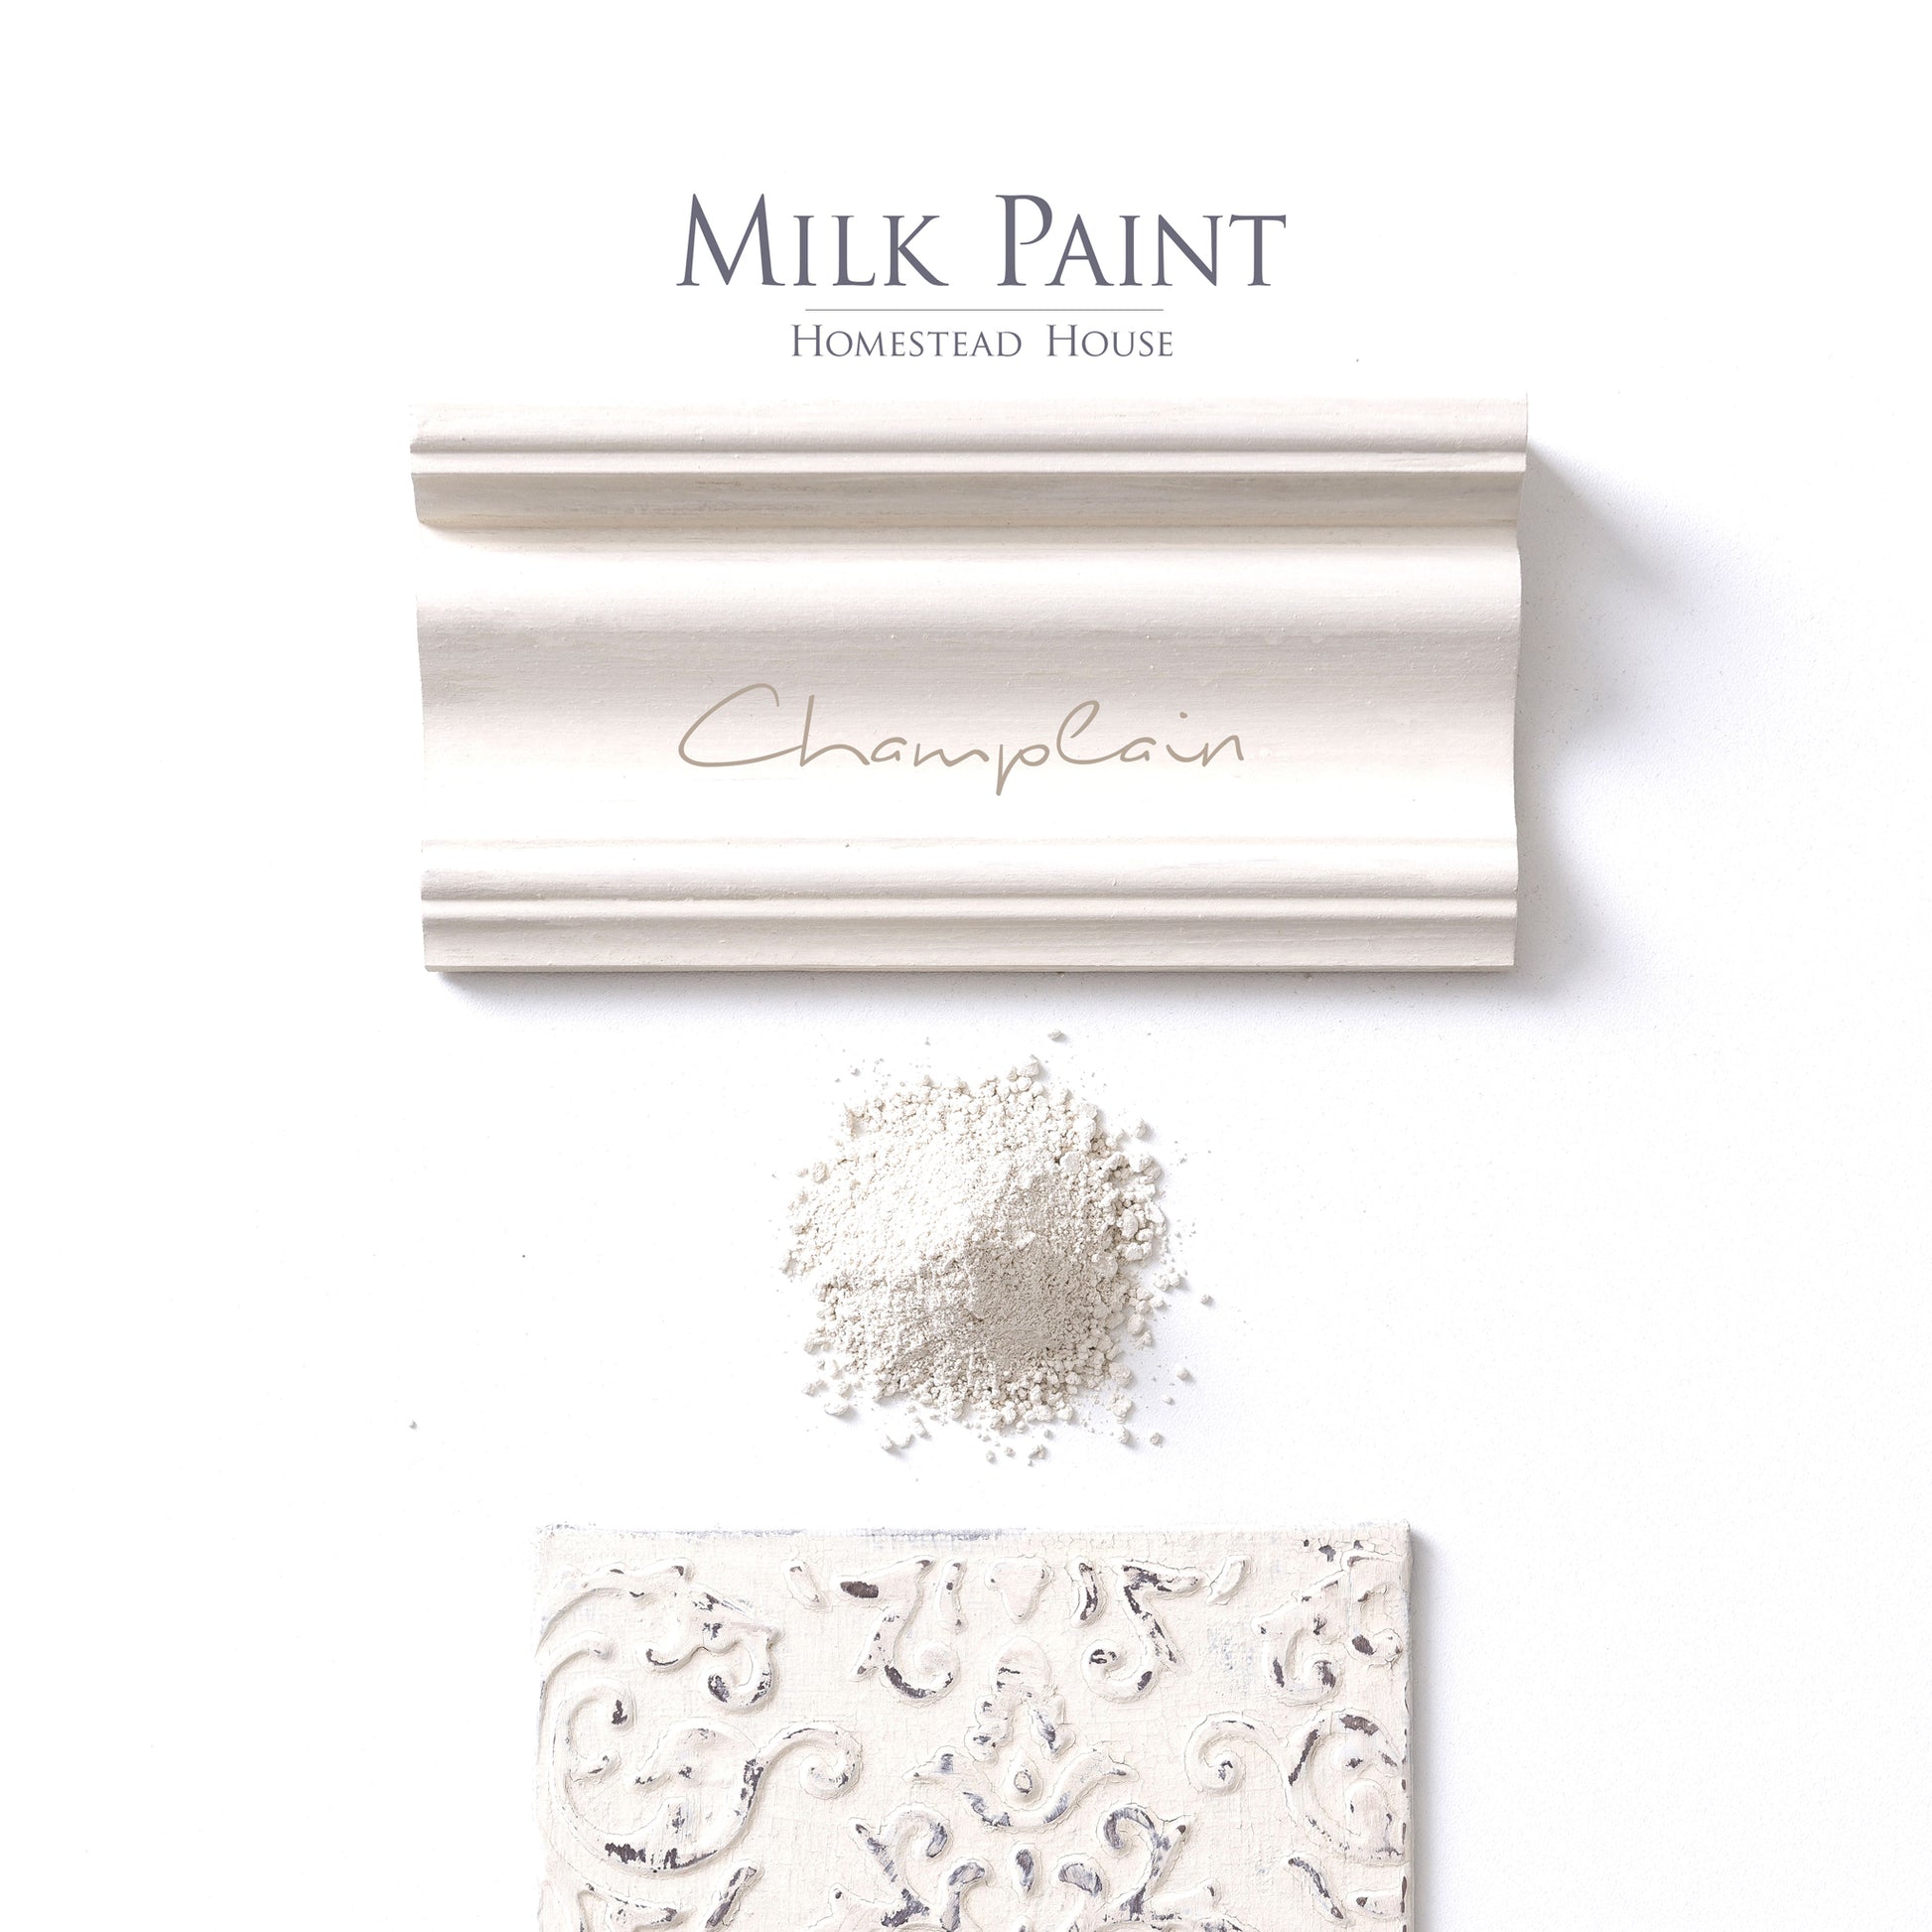 Milk Paint from Homestead House in Champlain, a perfect neutral ivory white with depth.  |  homesteadhouse.ca